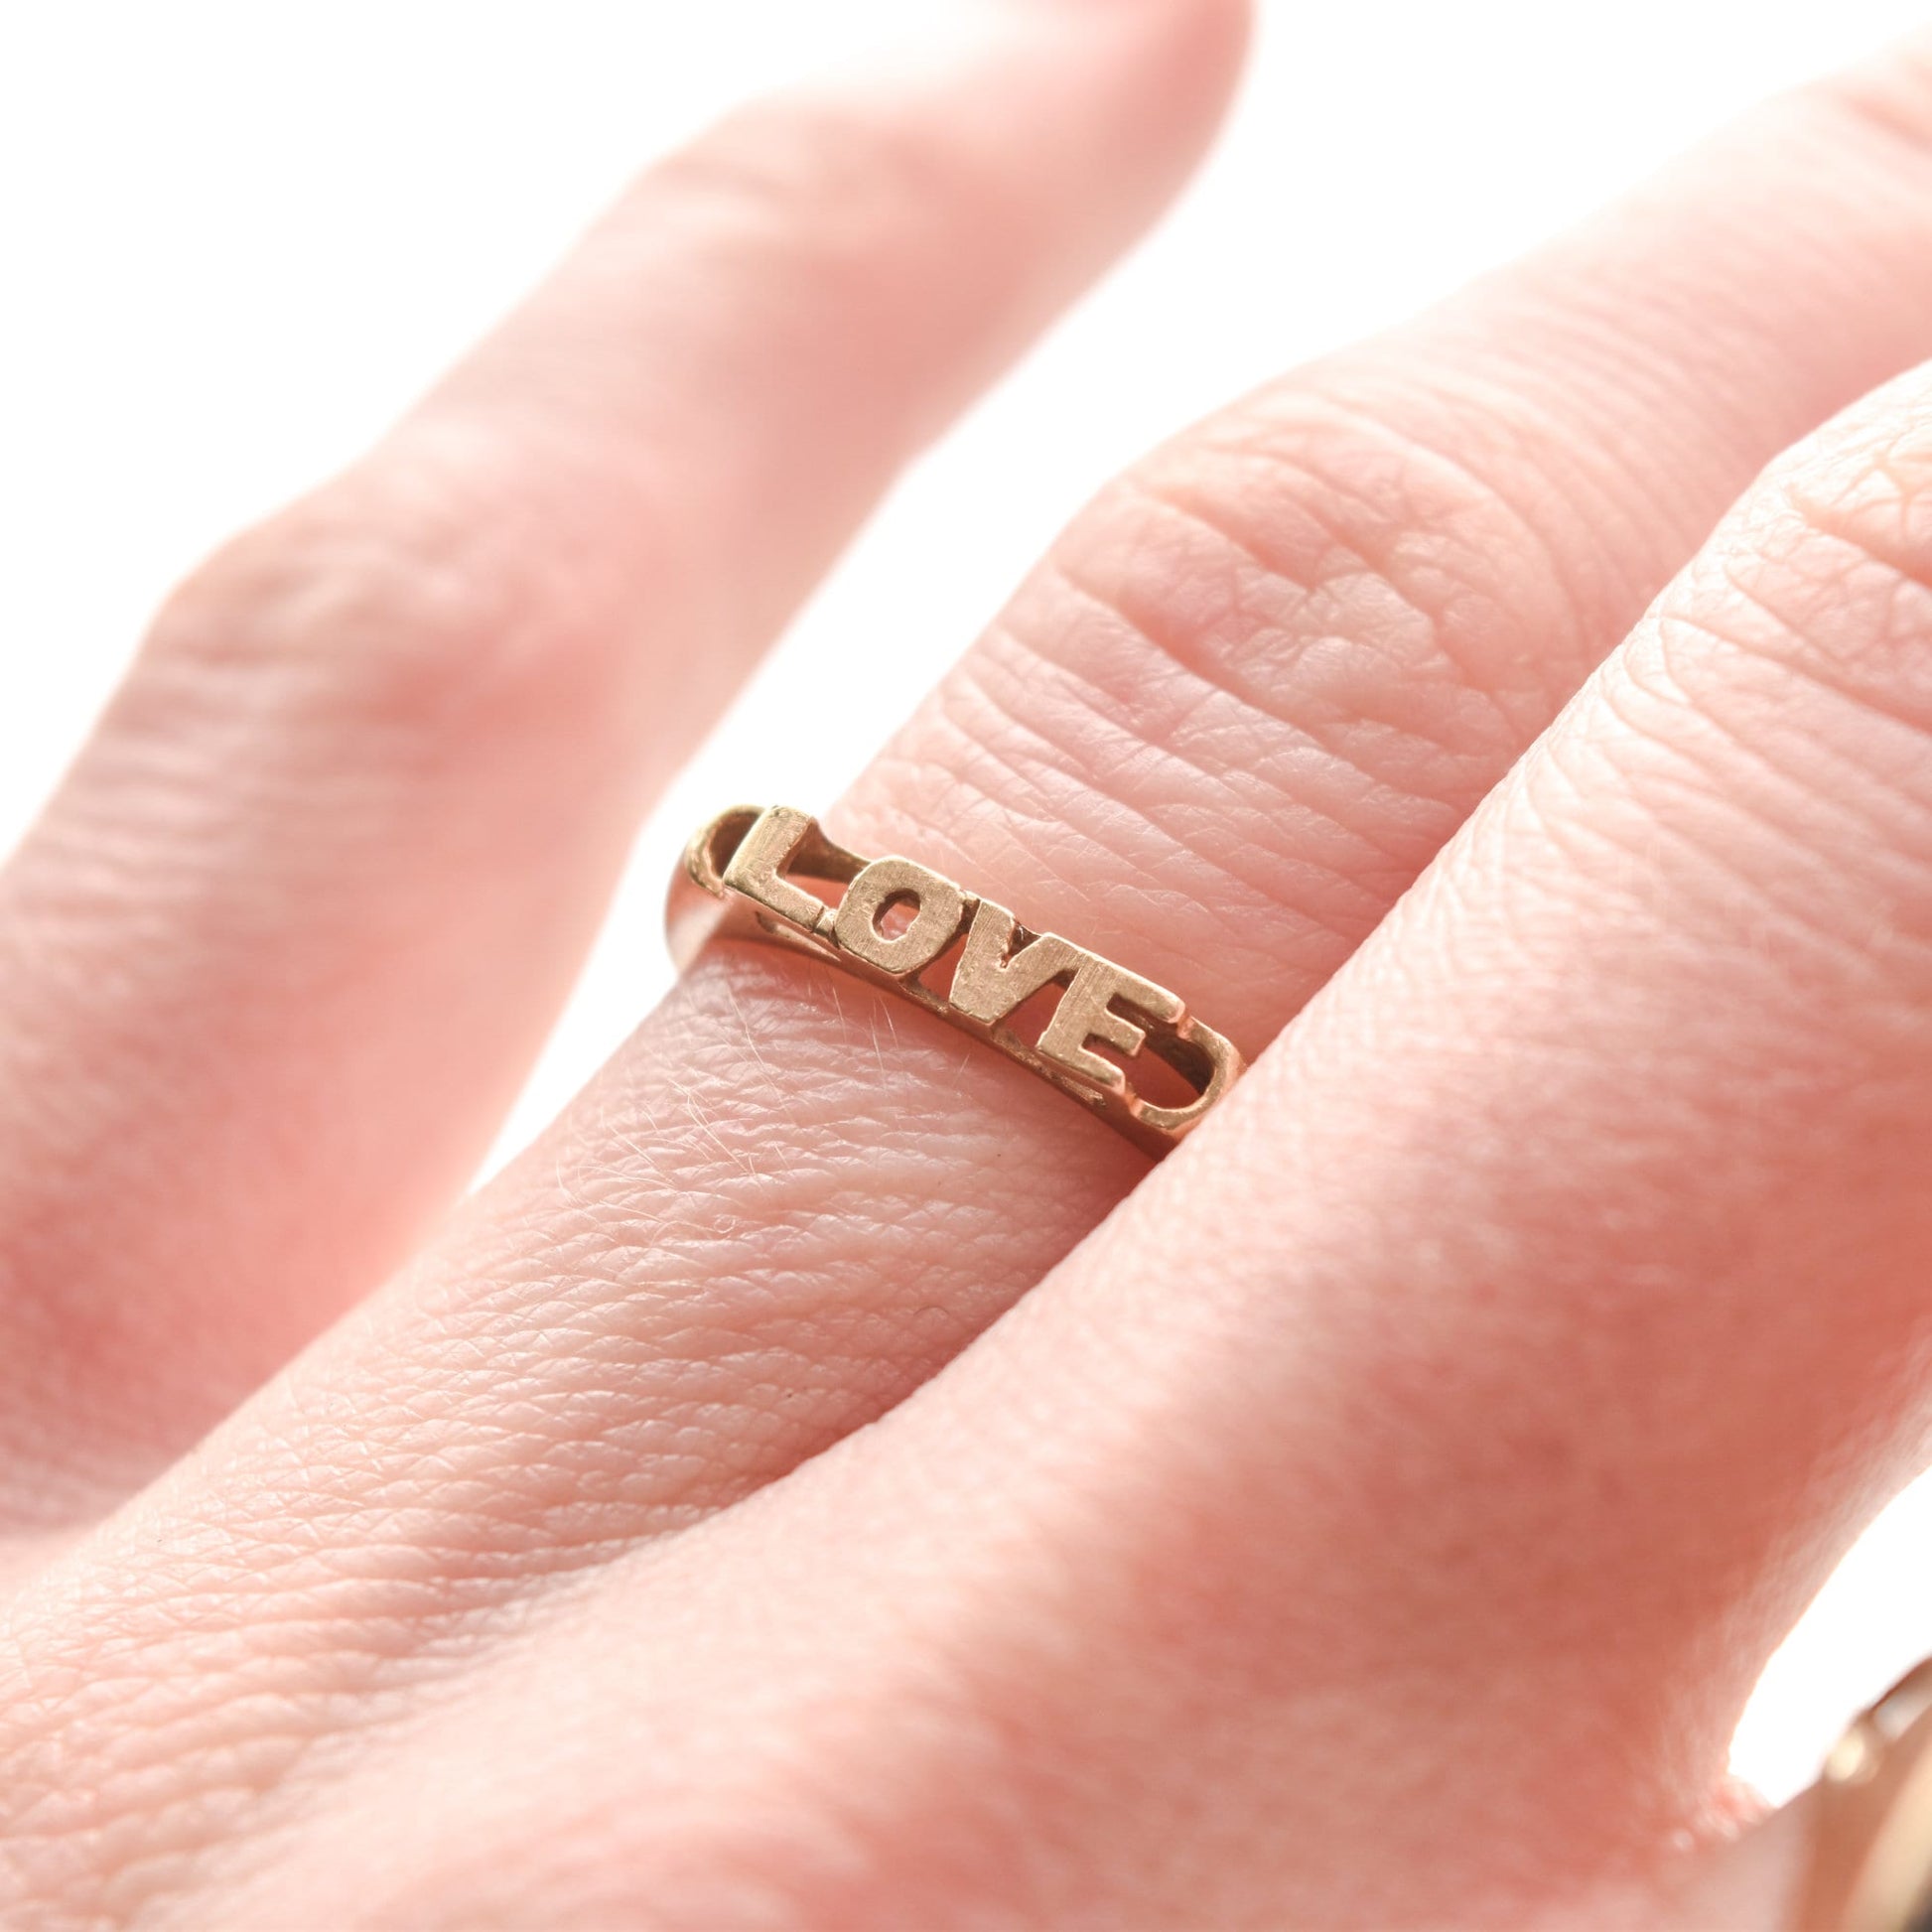 14K yellow gold minimalist 'LOVE' ring on finger, cute stacking ring, Valentine's Day gift idea, size 6.75 US.